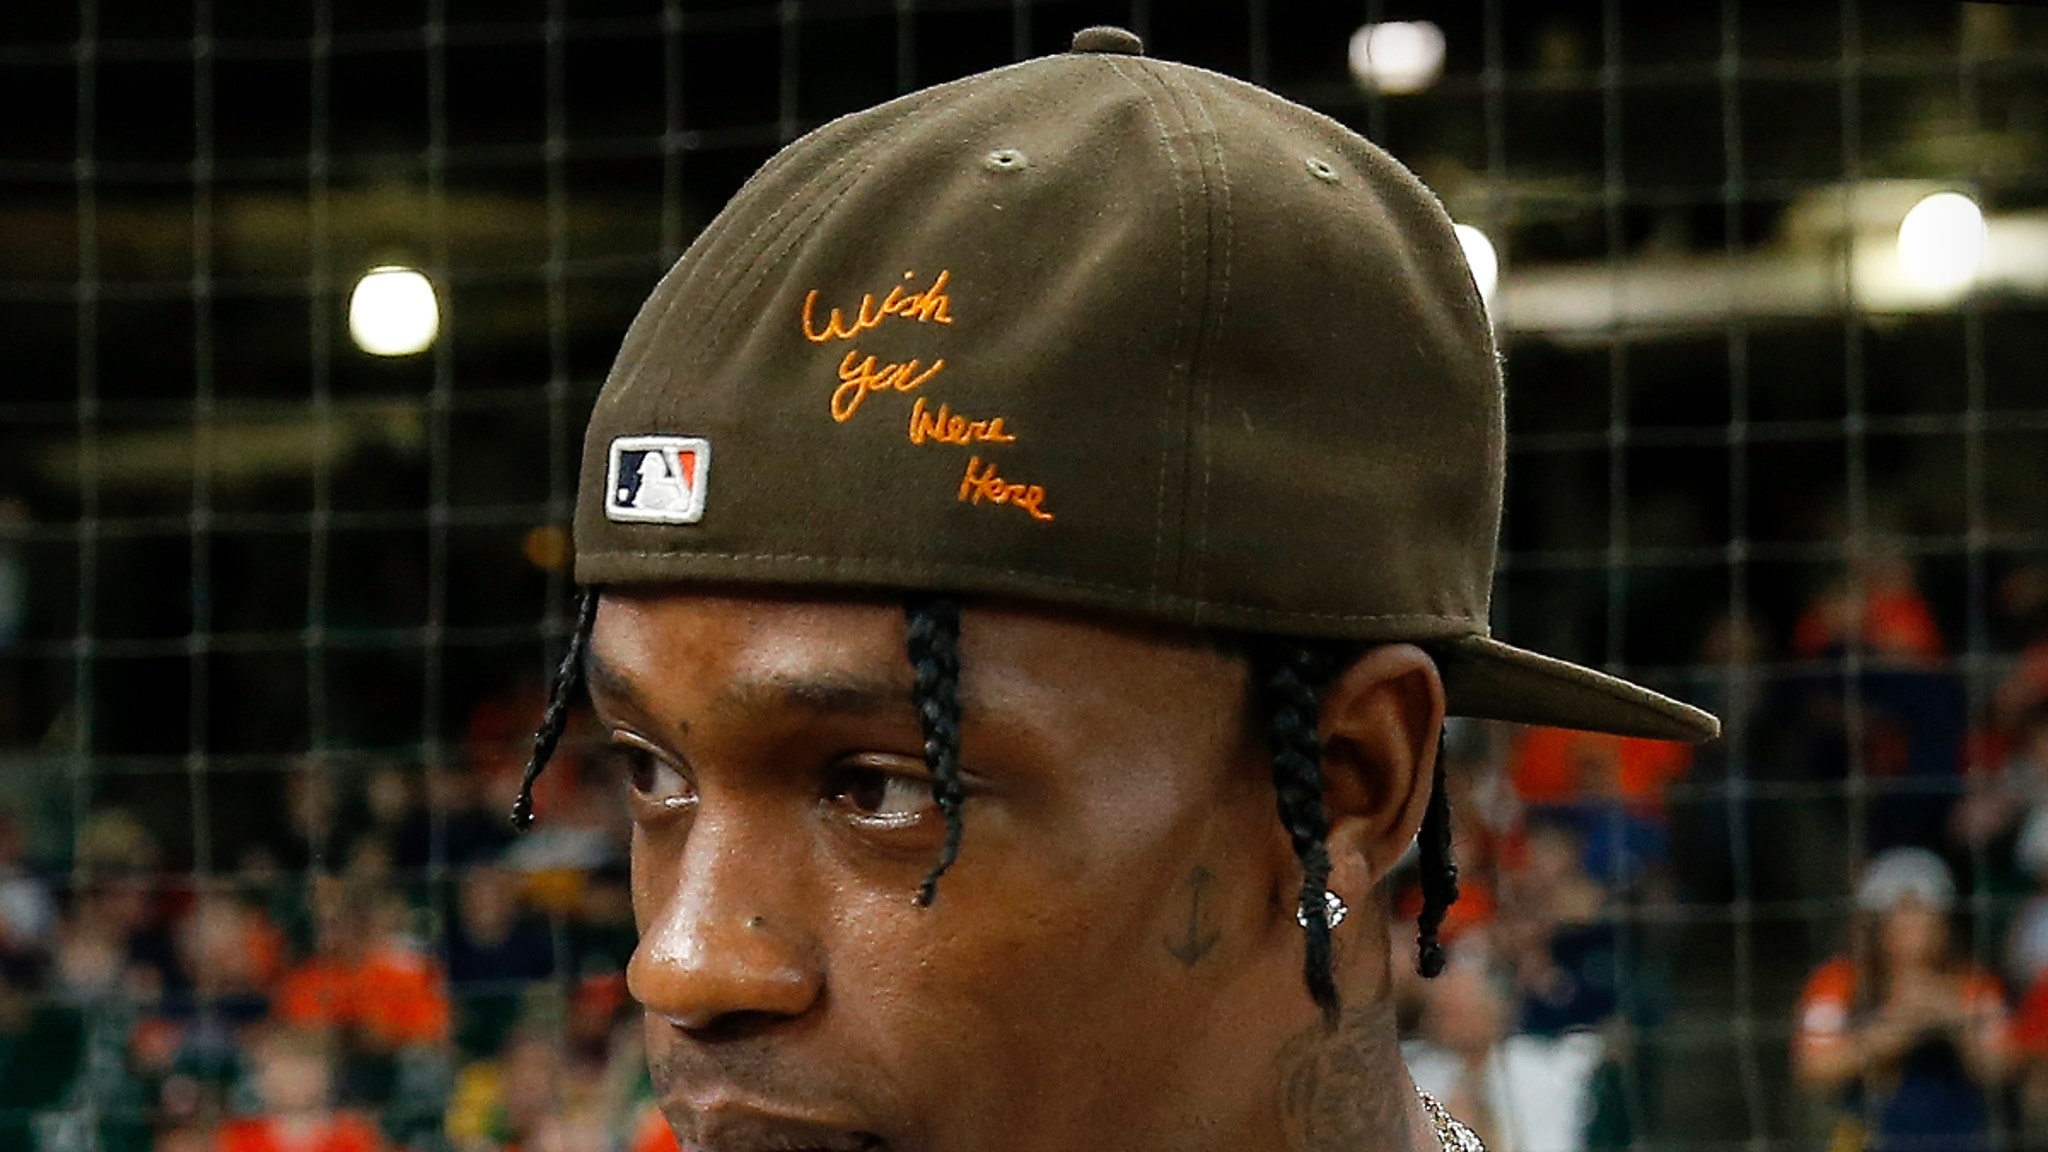 Travis Scott Went to Dave &amp; Buster's After Astroworld Festival, Unaware of T..